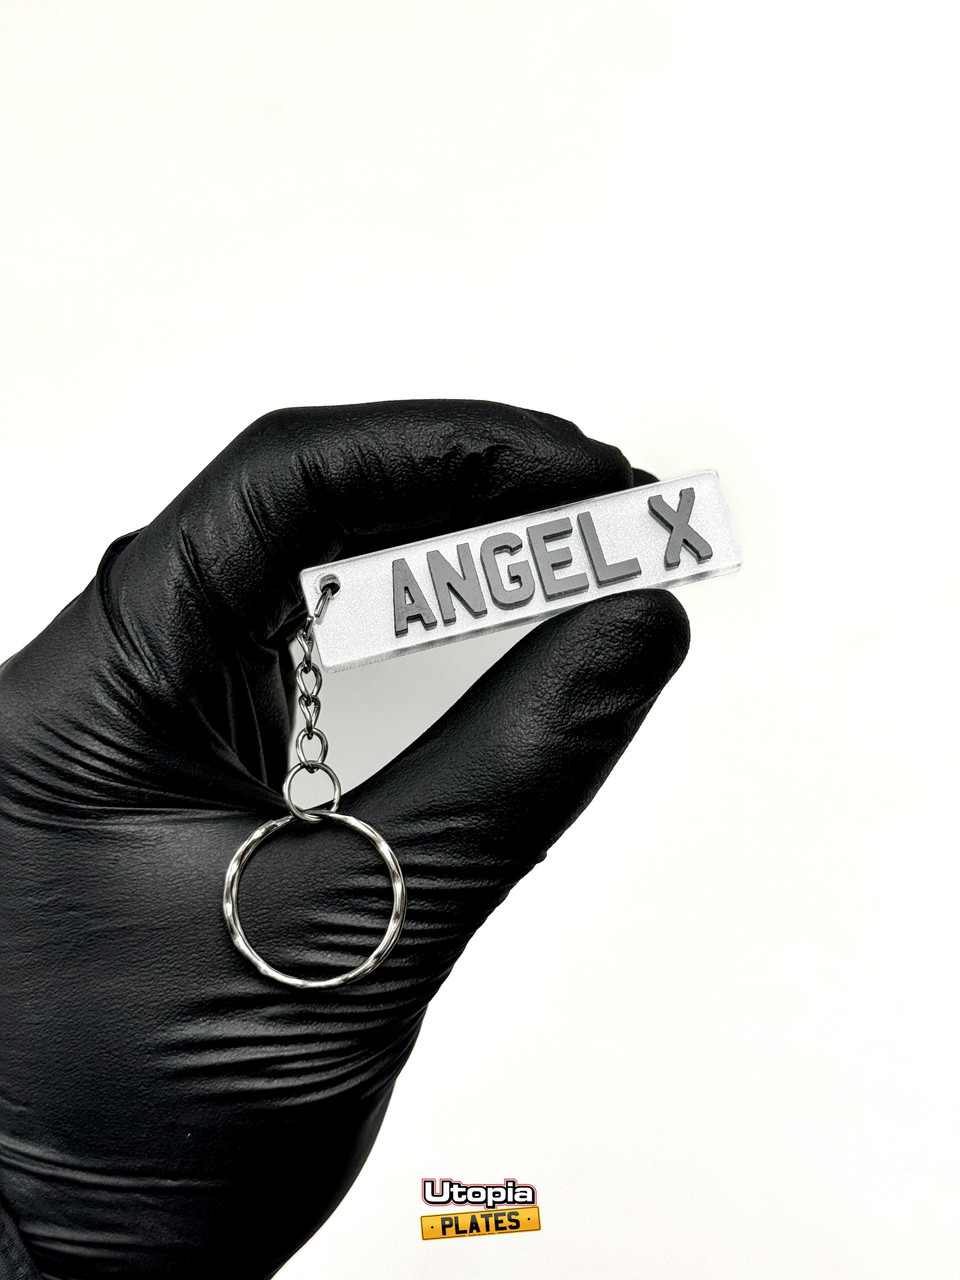 A white 4D style front number plate keyring featuring the text "ANGEL X"